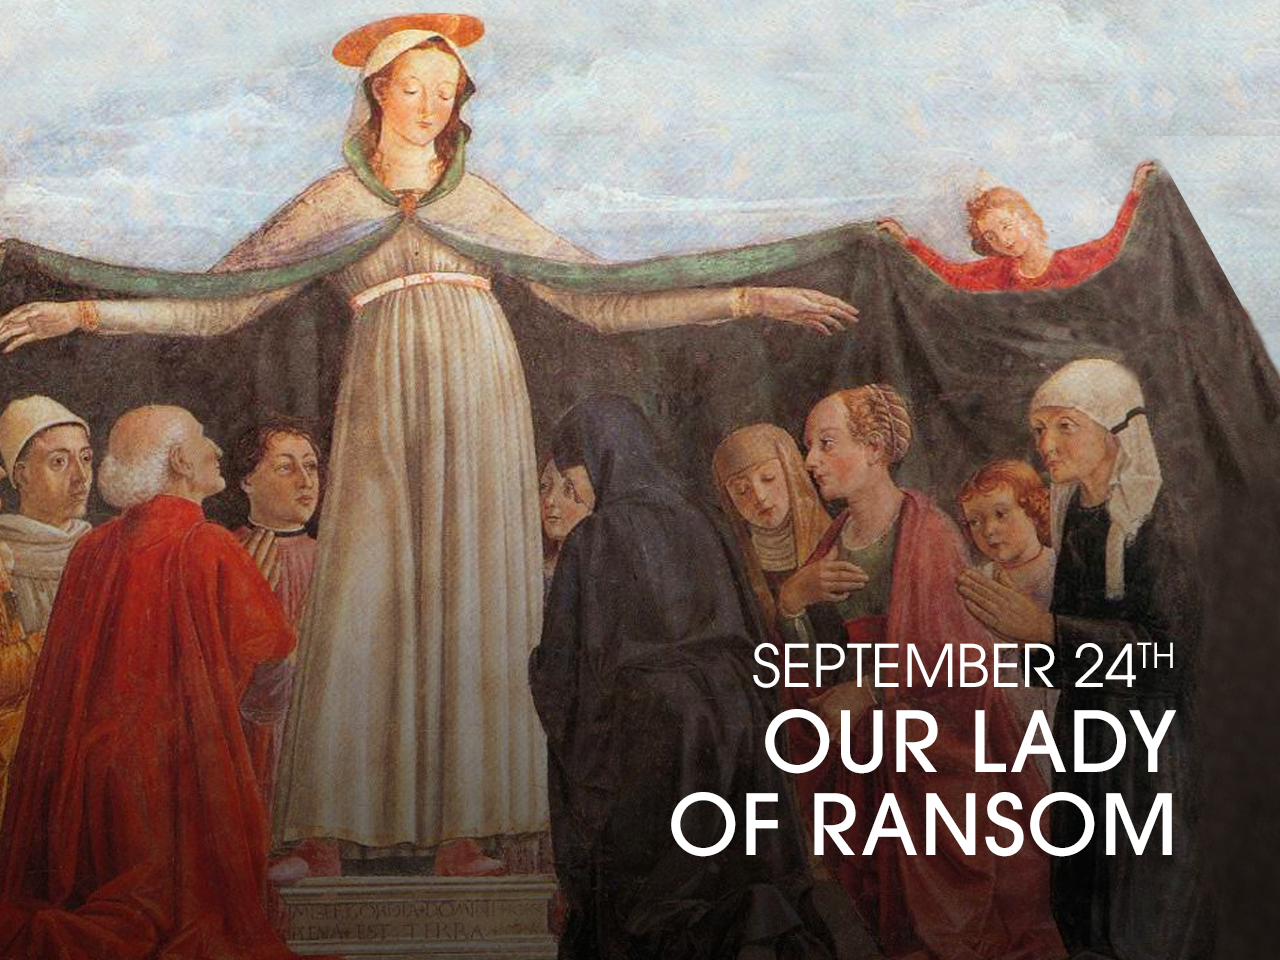 Our Lady of Ransom (Our Lady of Mercy)